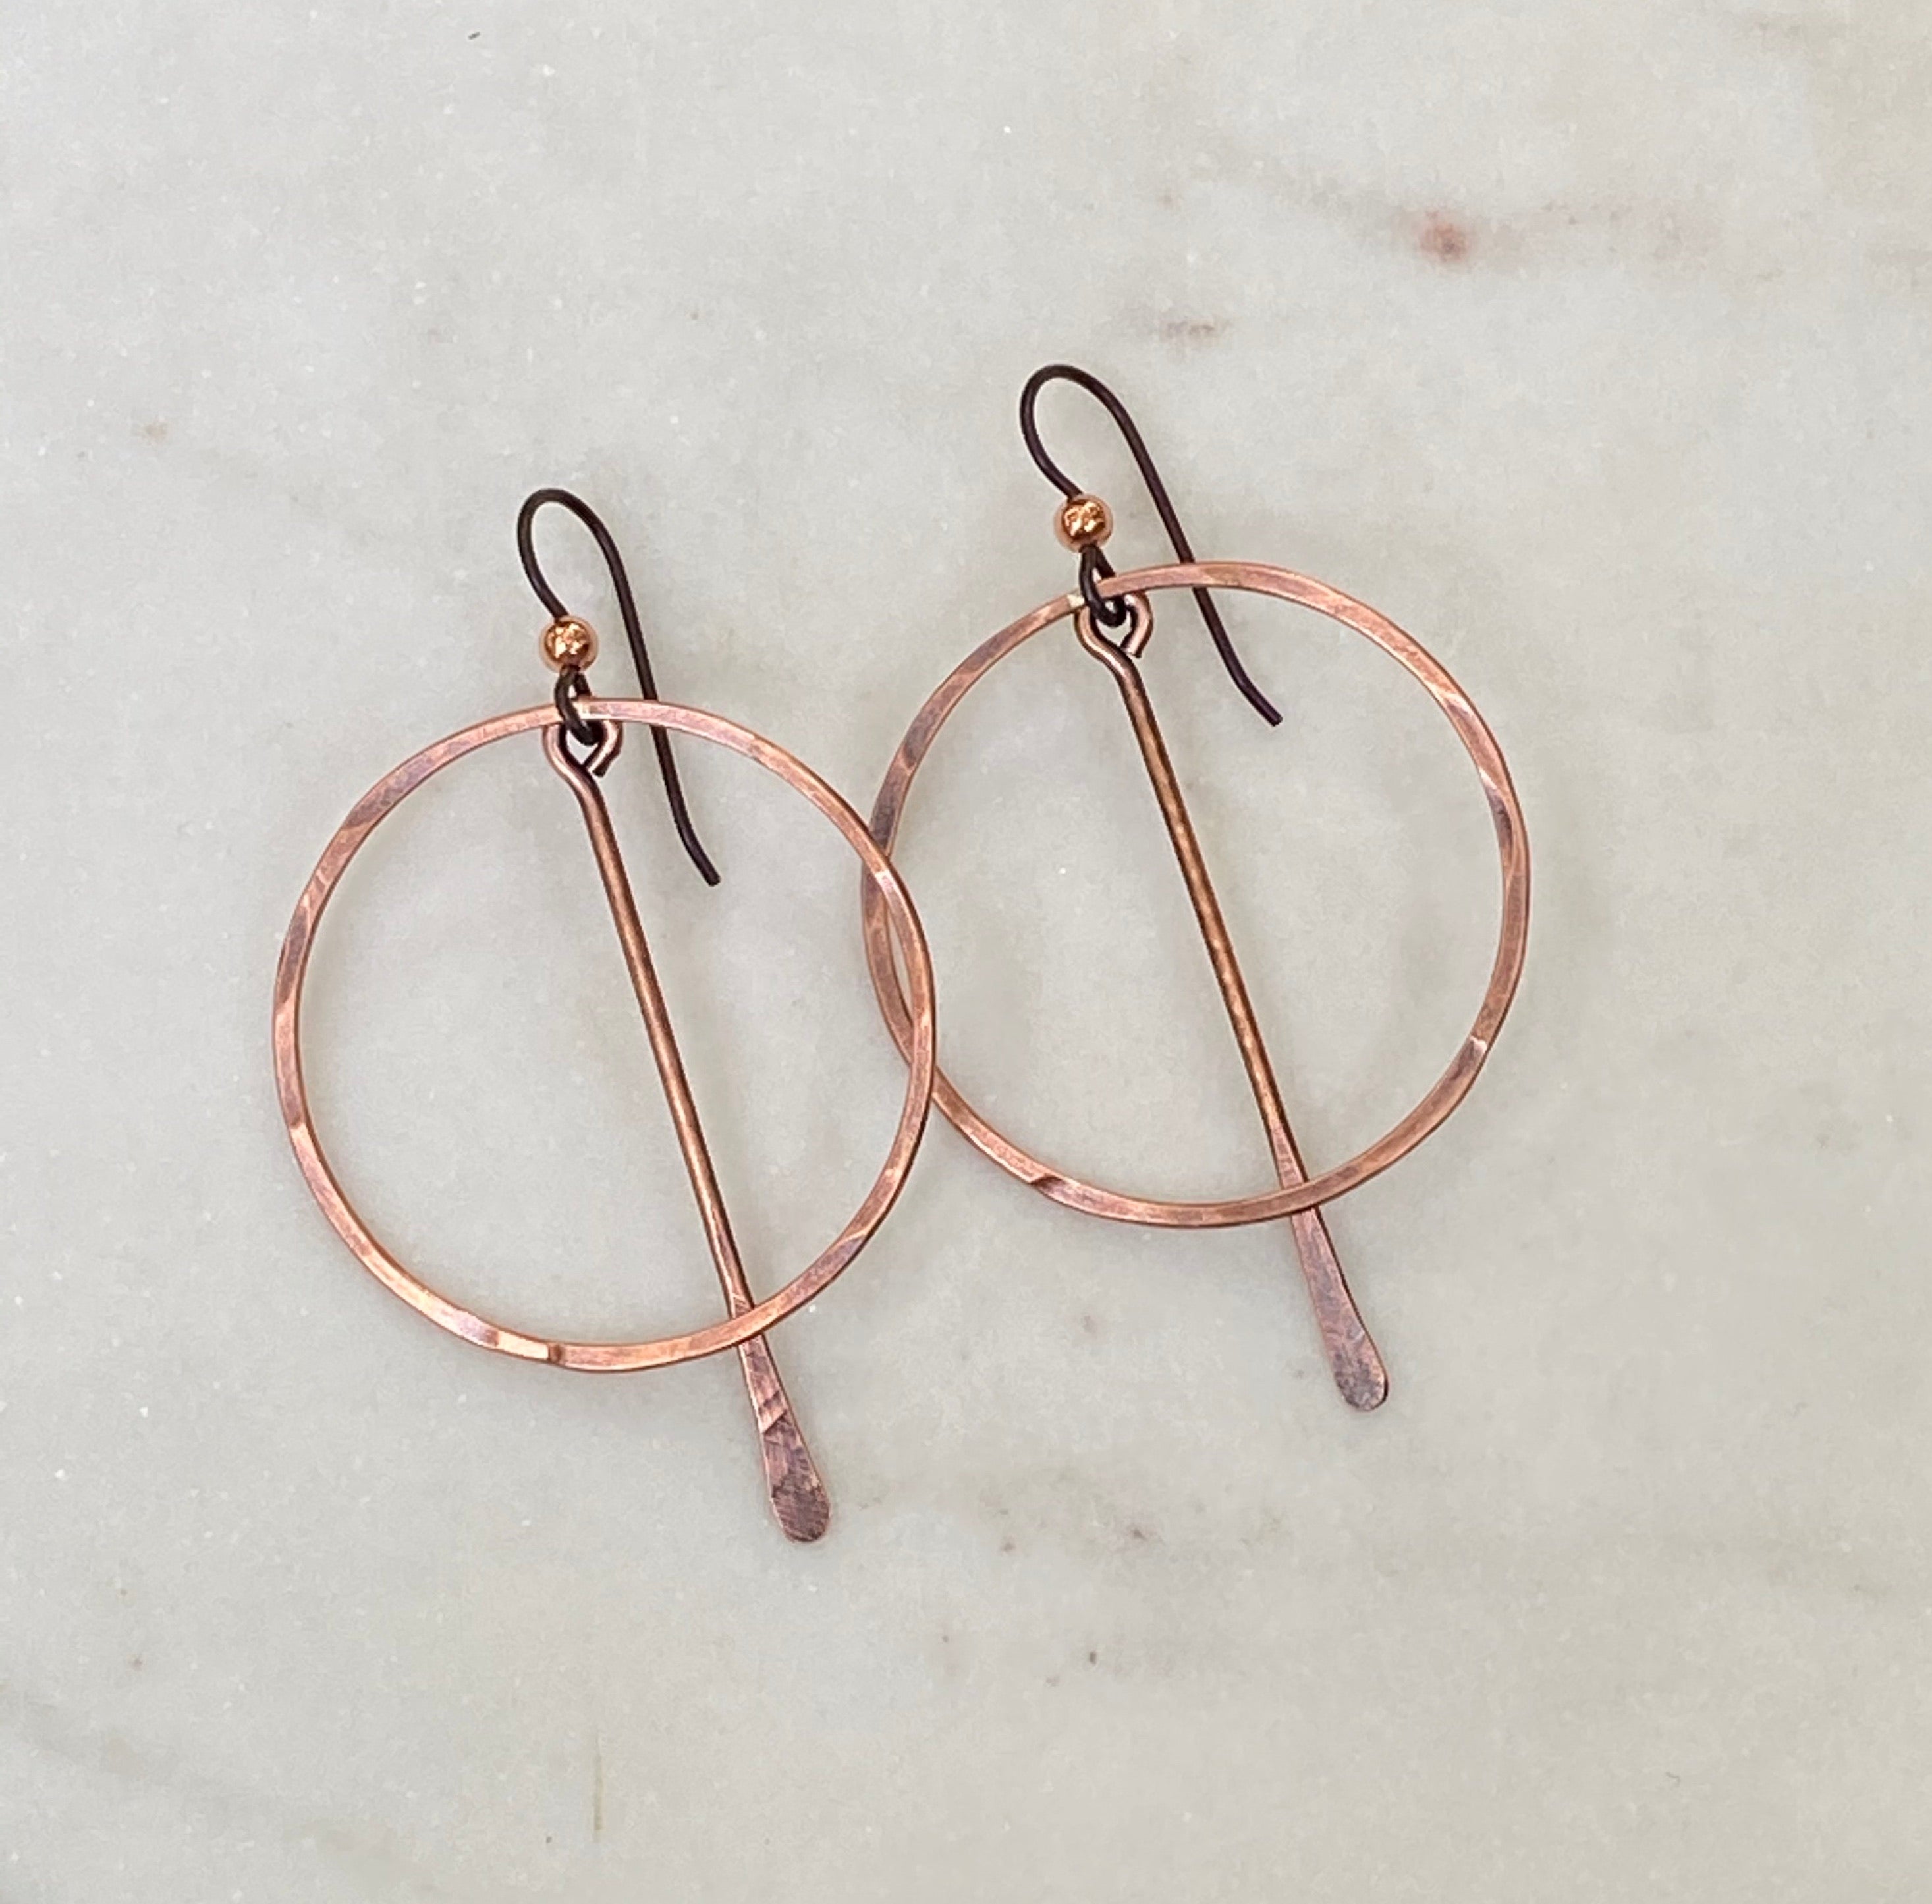 Copper Necklaces – Artisan Jewelry by Erica Gooding